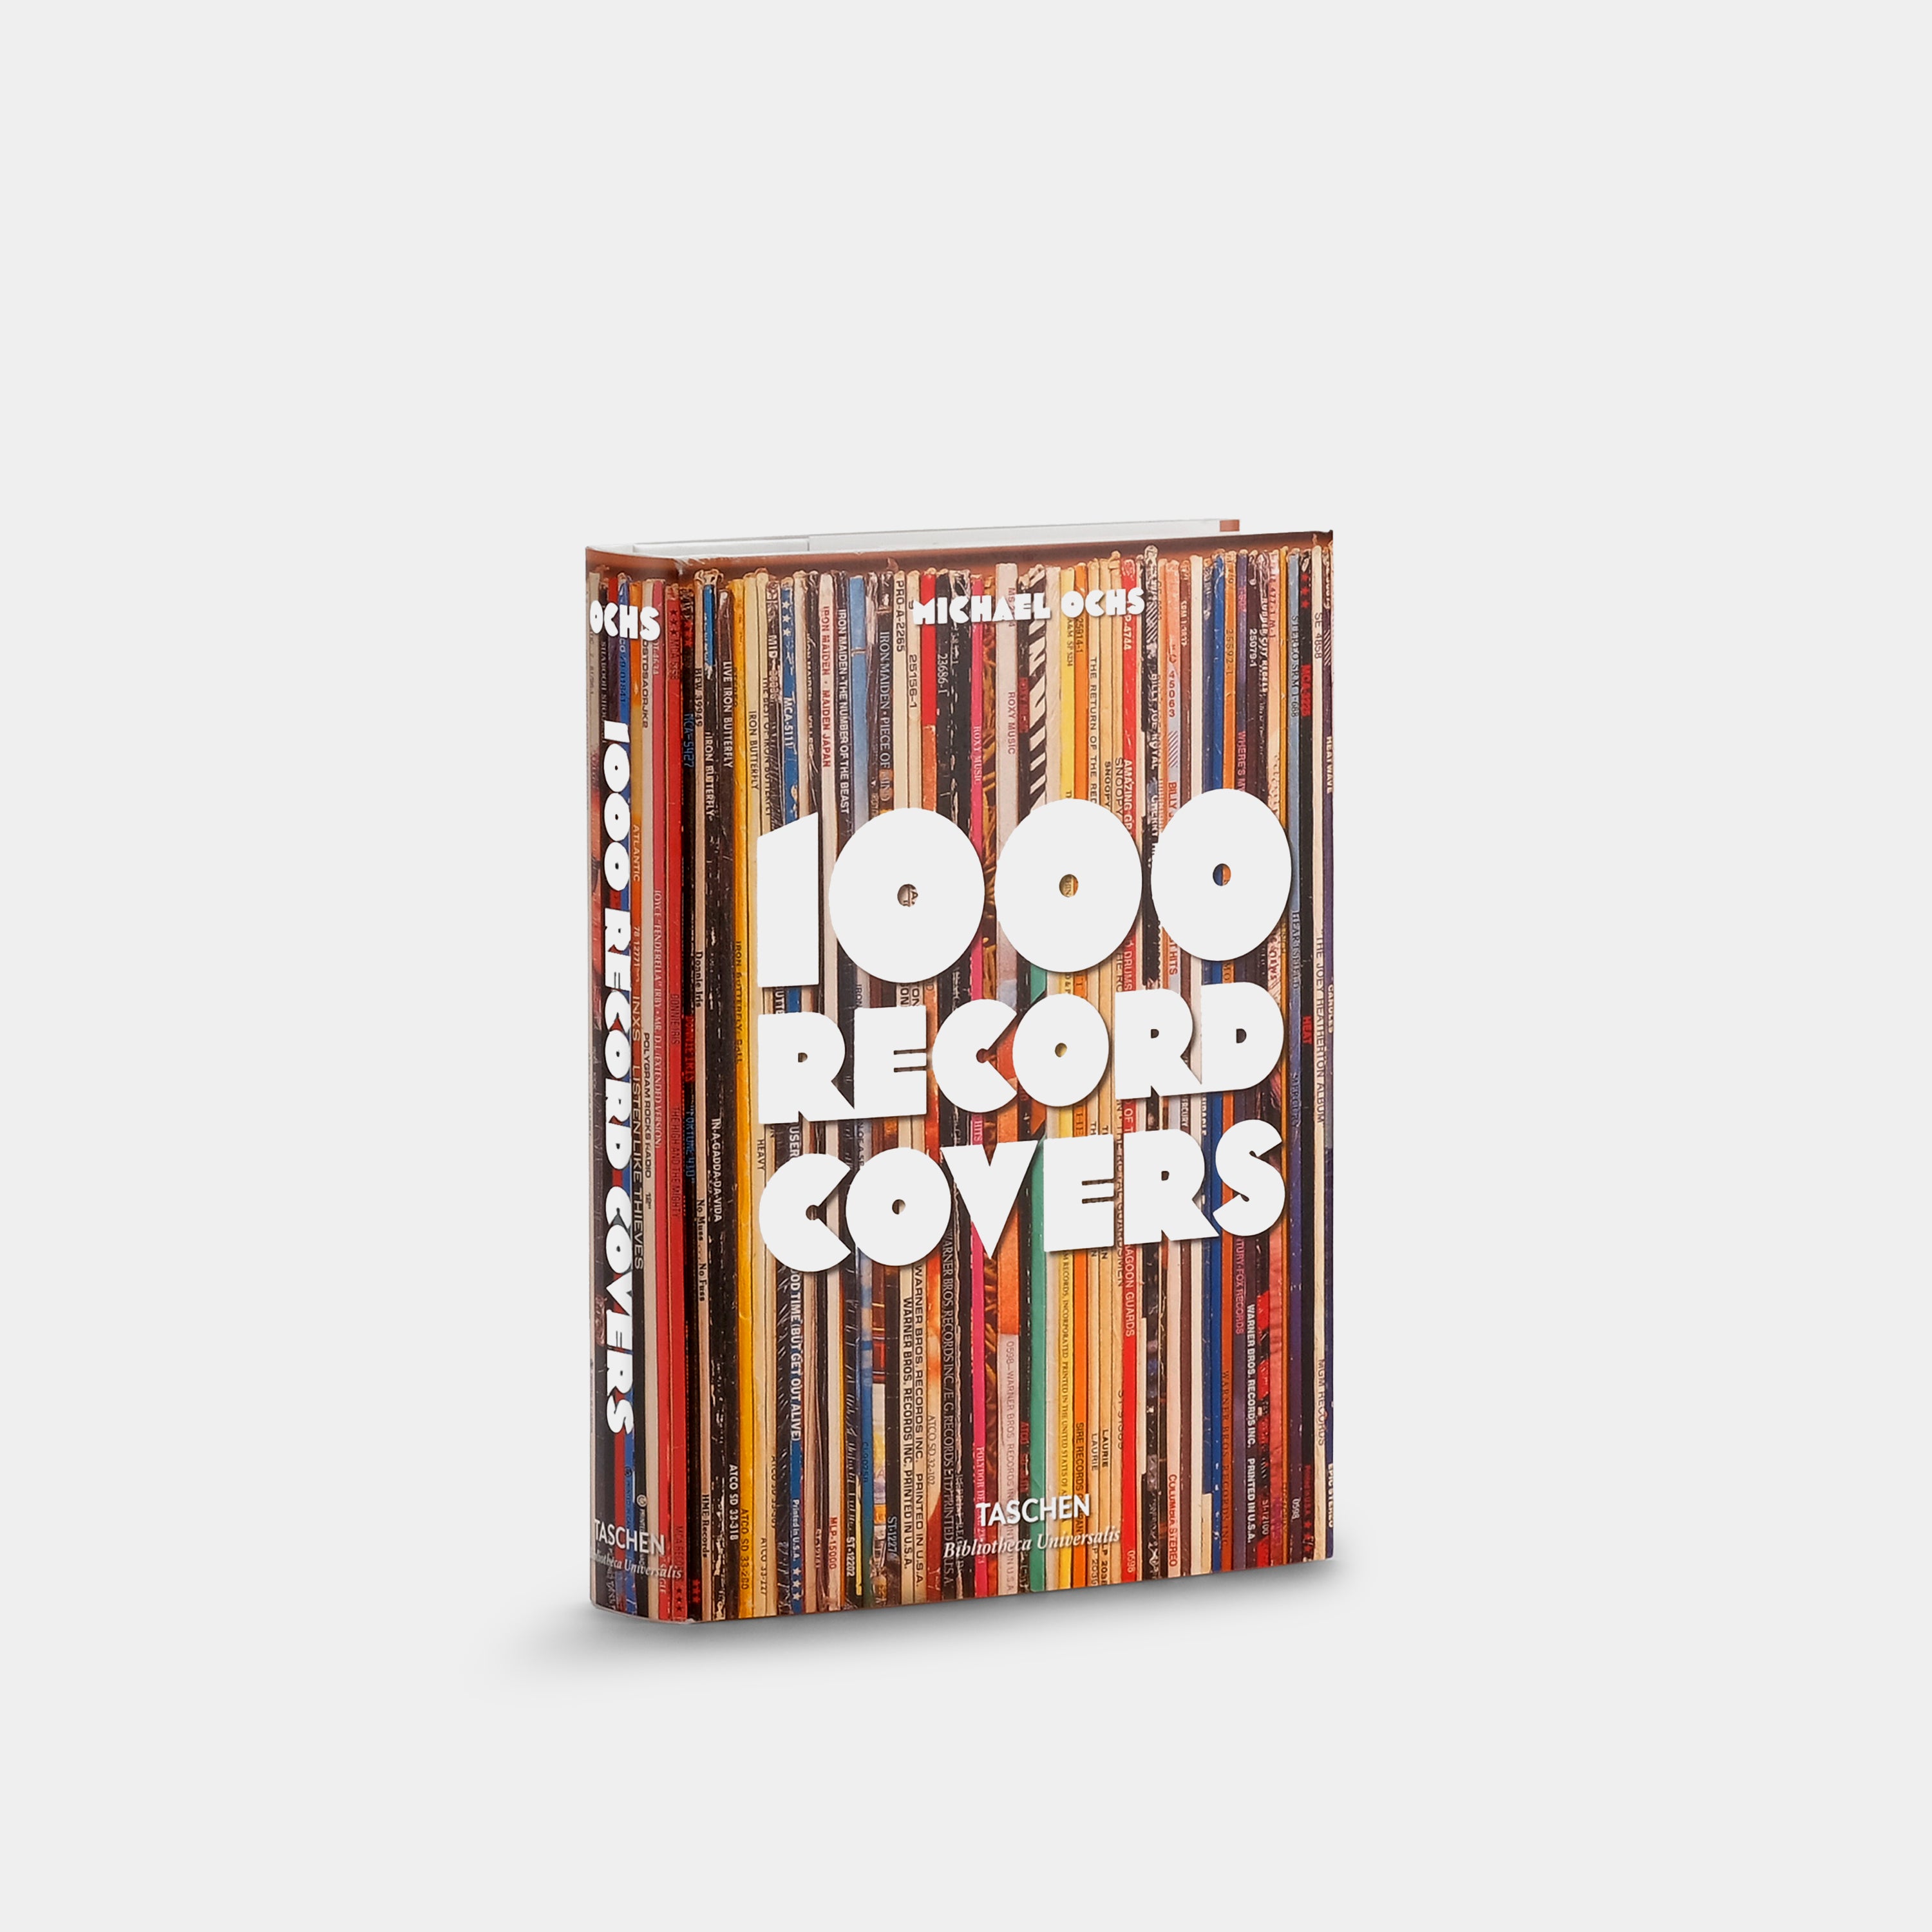 1000 Record Covers Taschen Book